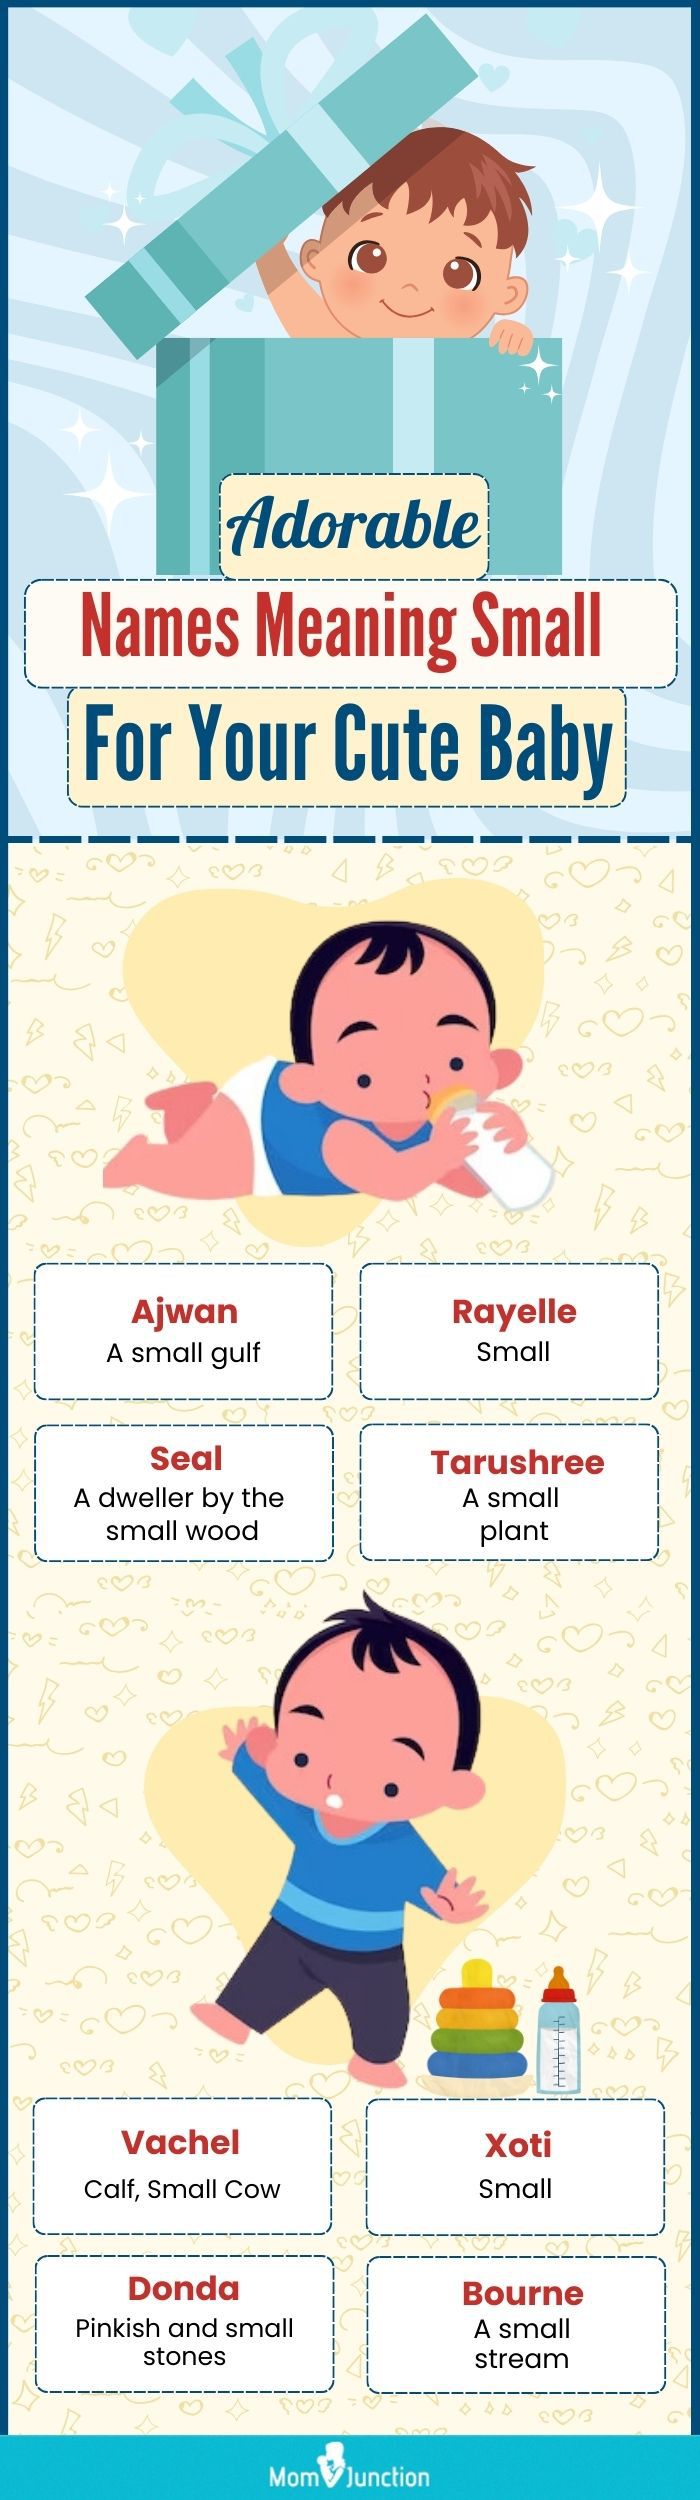 adorable names meaning small for your cute baby (infographic)